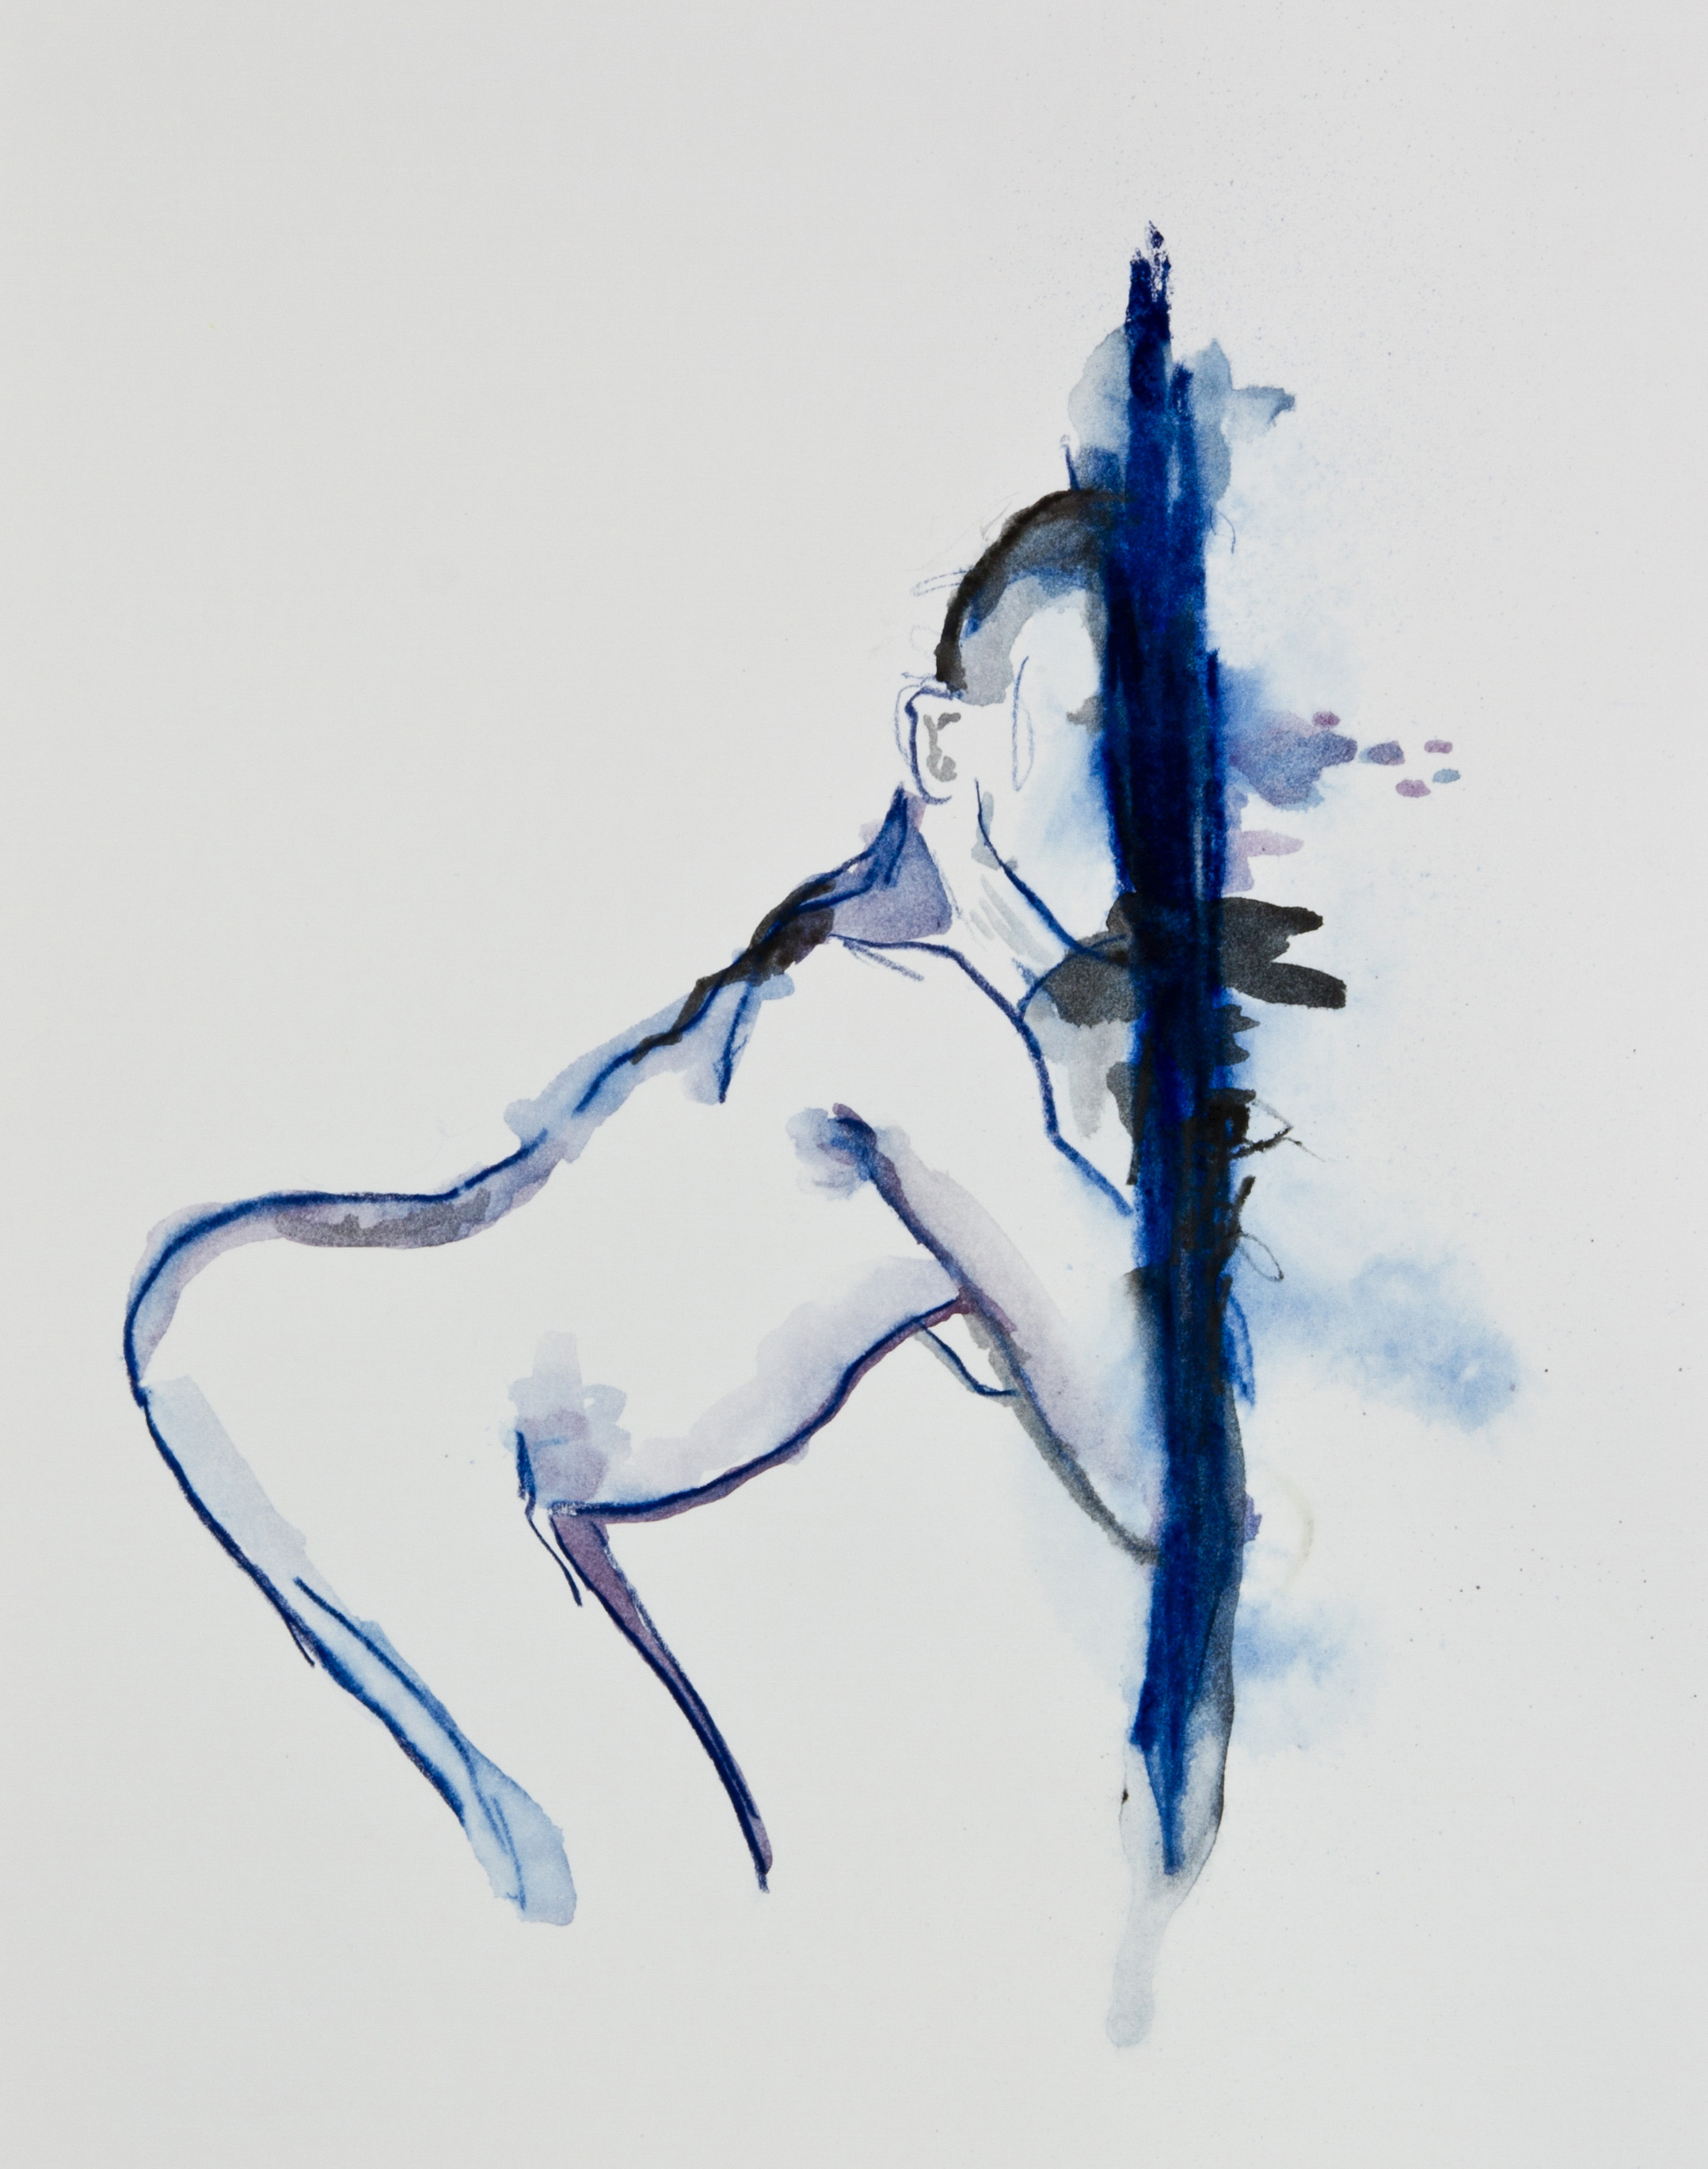 Blue, 2013, graphite, crayon and watercolor pencil on paper, 11x14 inches